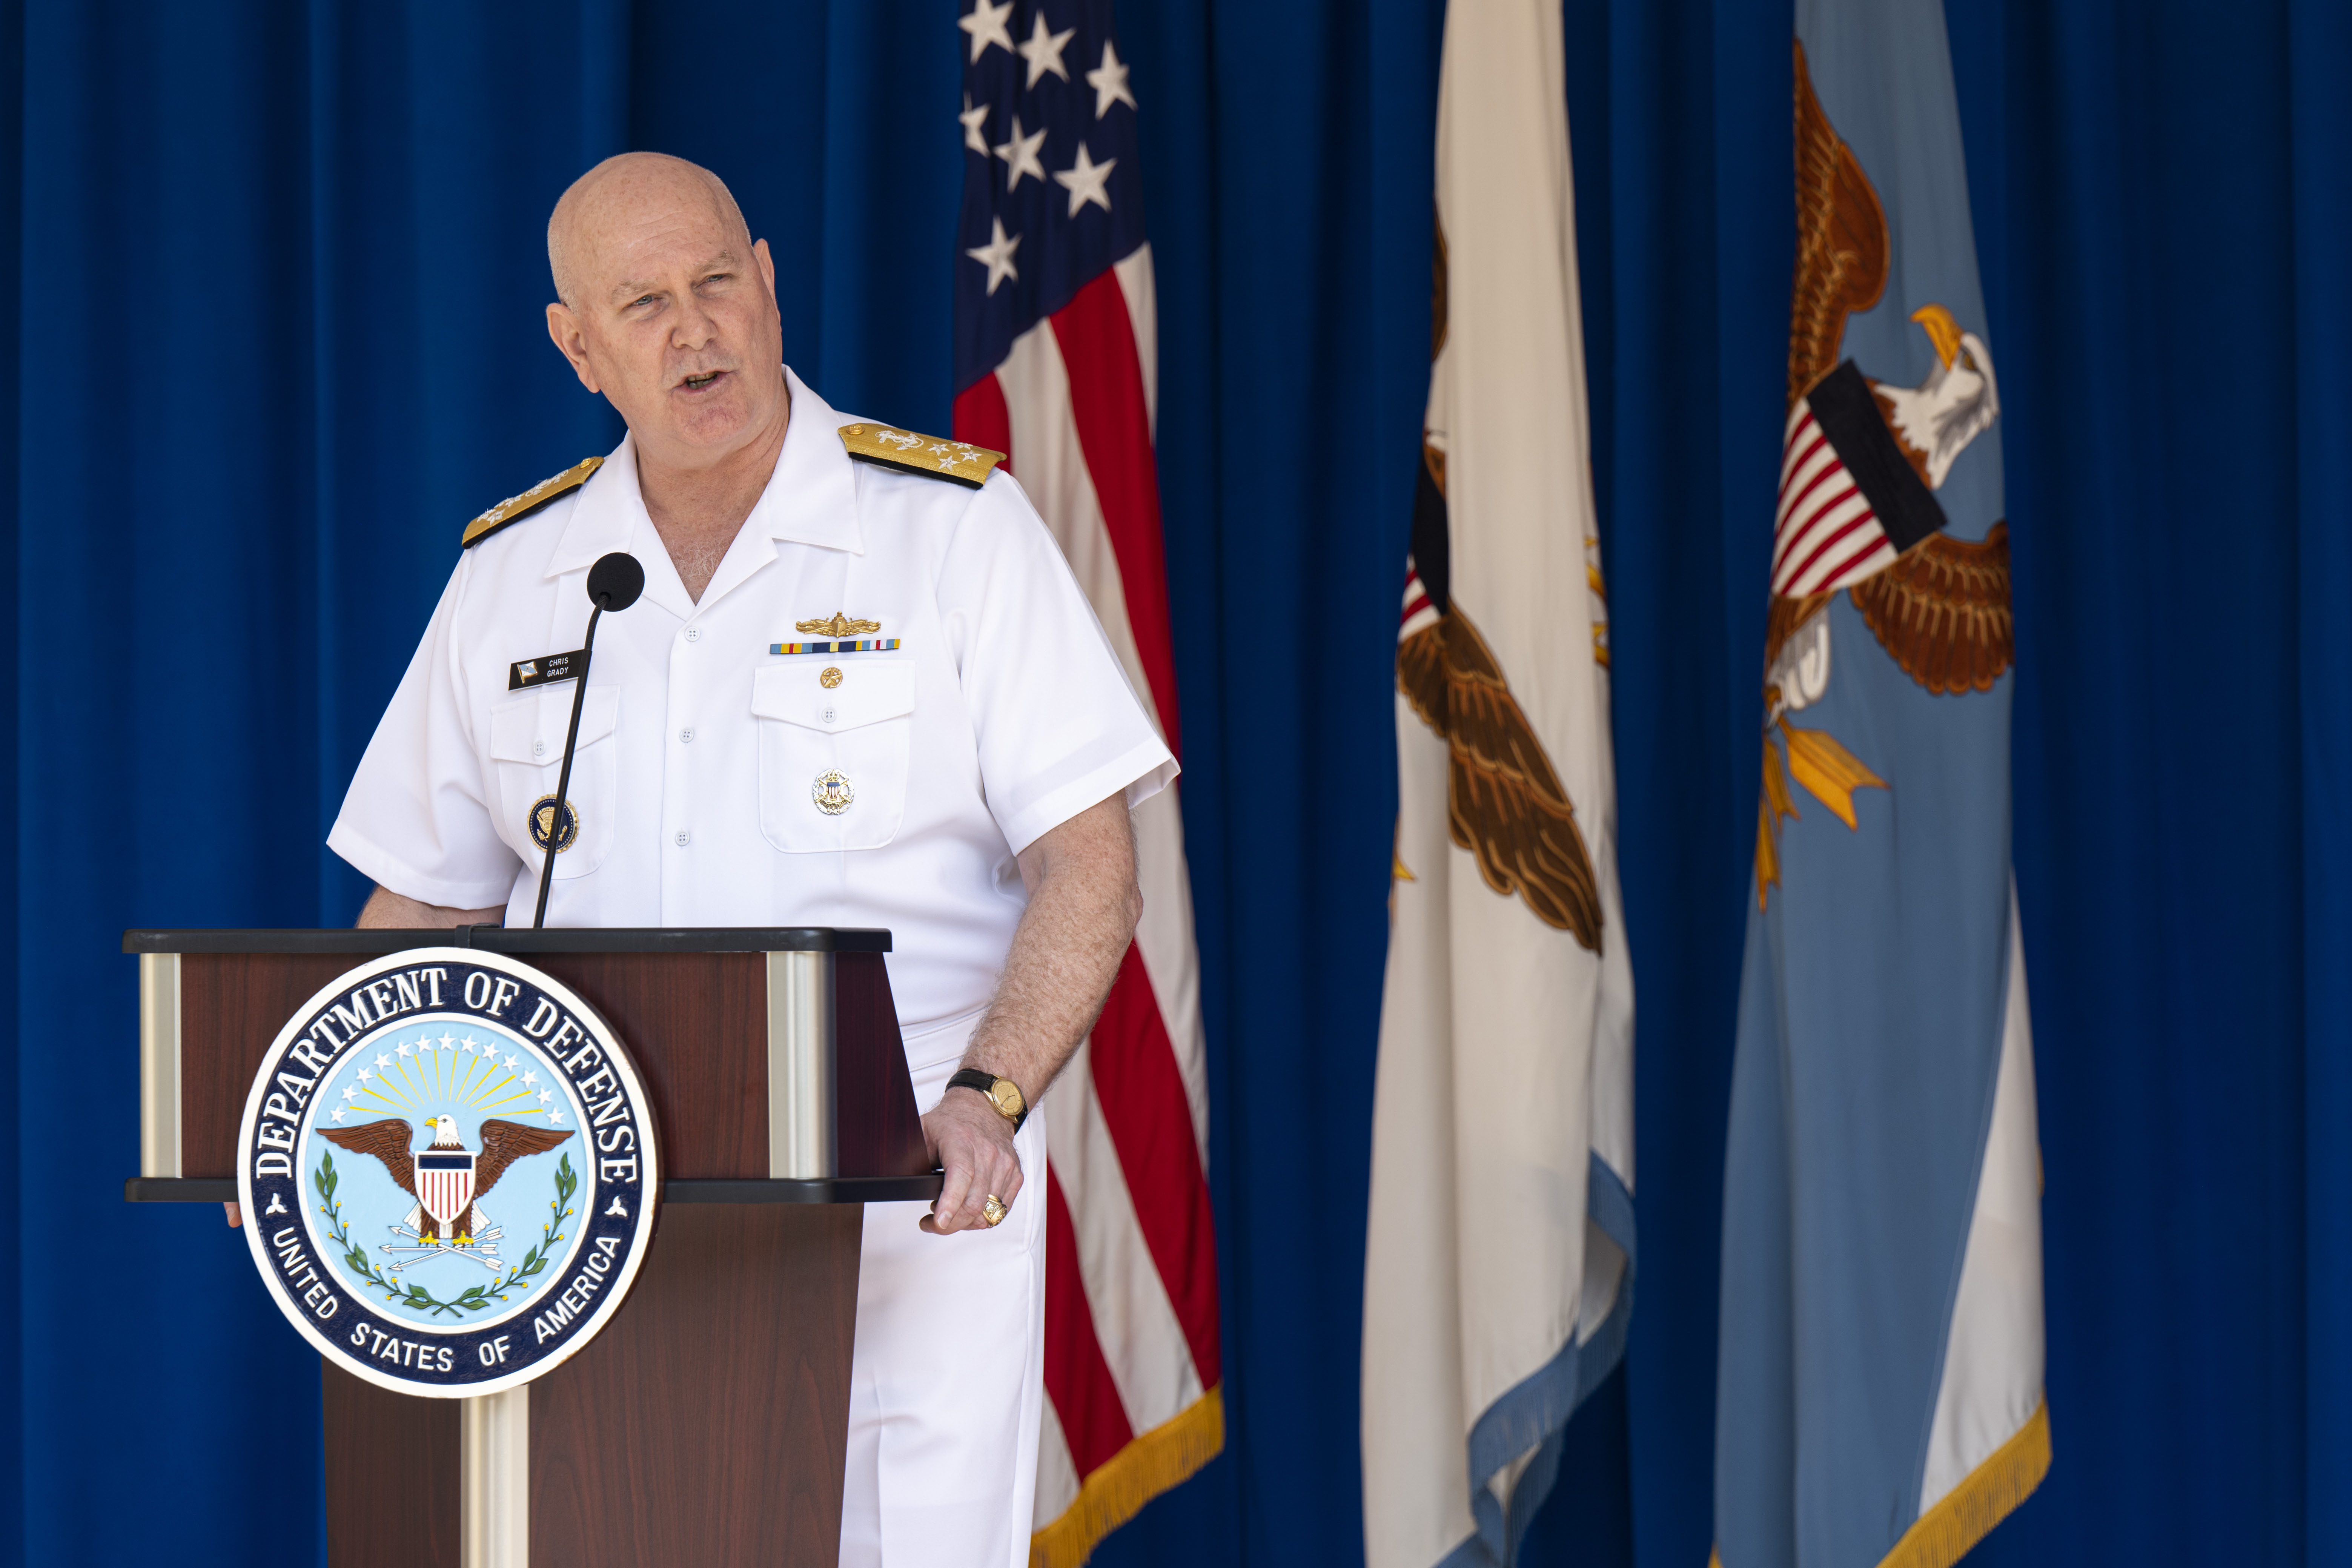 Vice Chairman of the Joint Chiefs of Staff Navy Adm. Christopher W. Grady